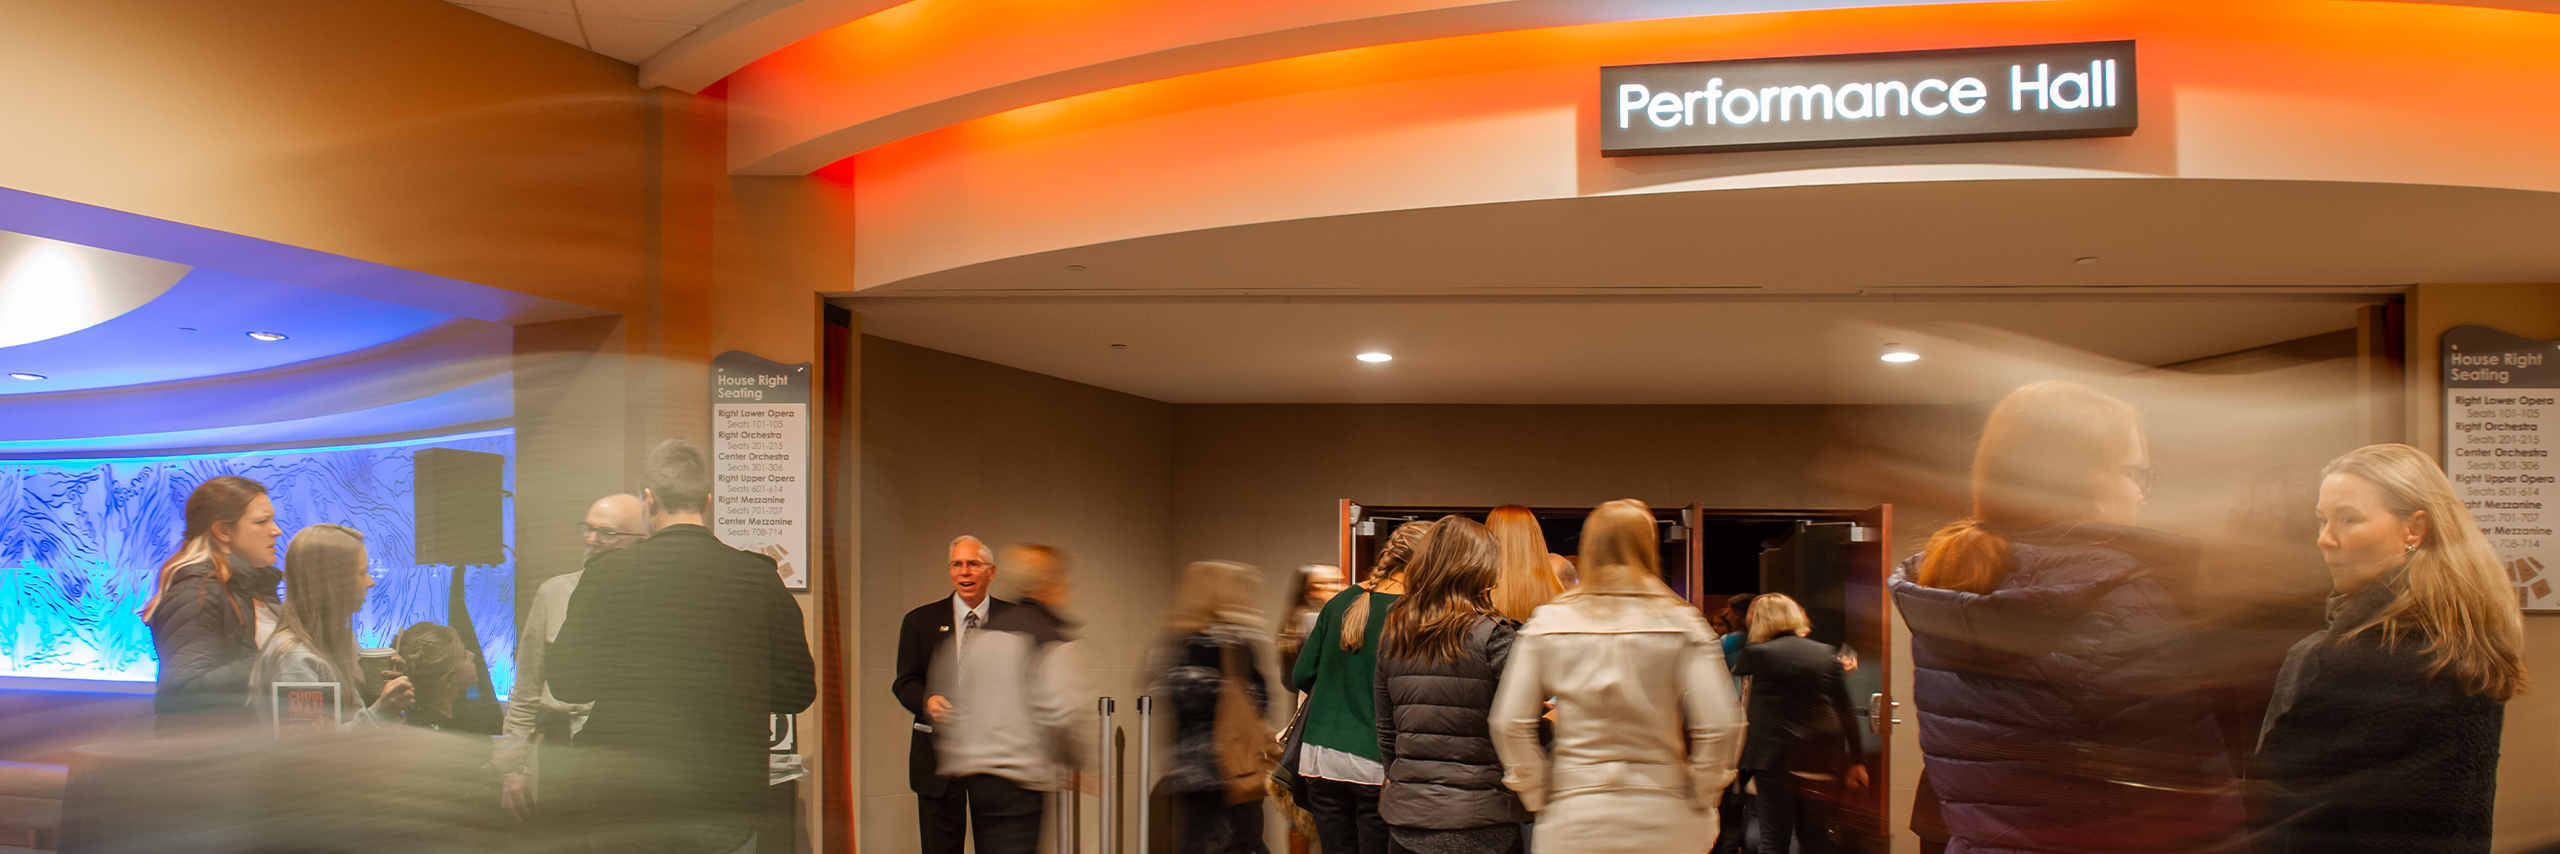 A busy Performance Hall lobby with patrons.